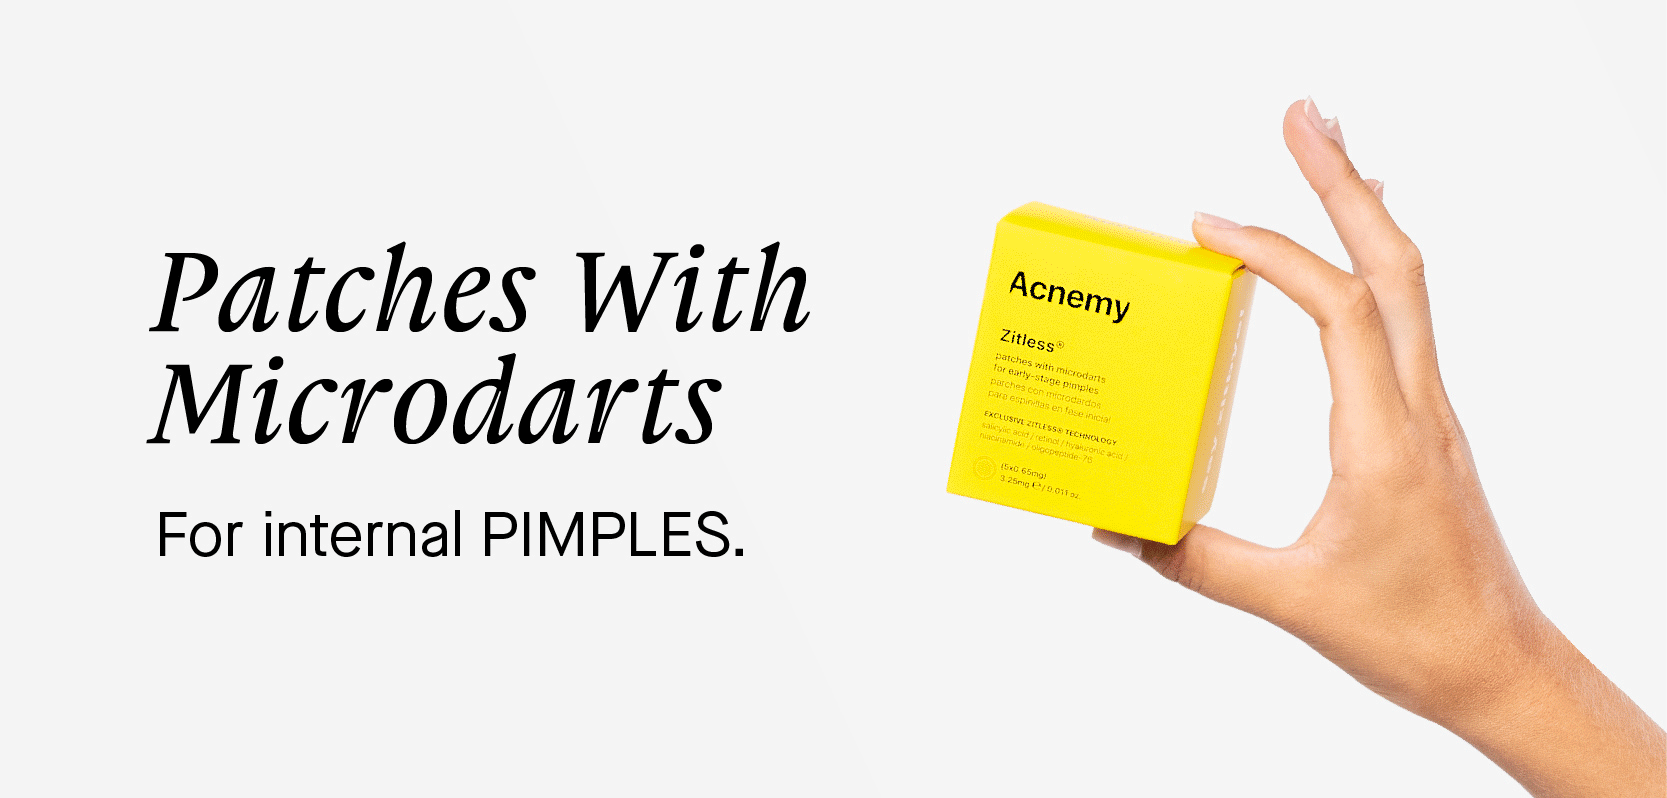 Patches With Microdarts For internal PIMPLES. 